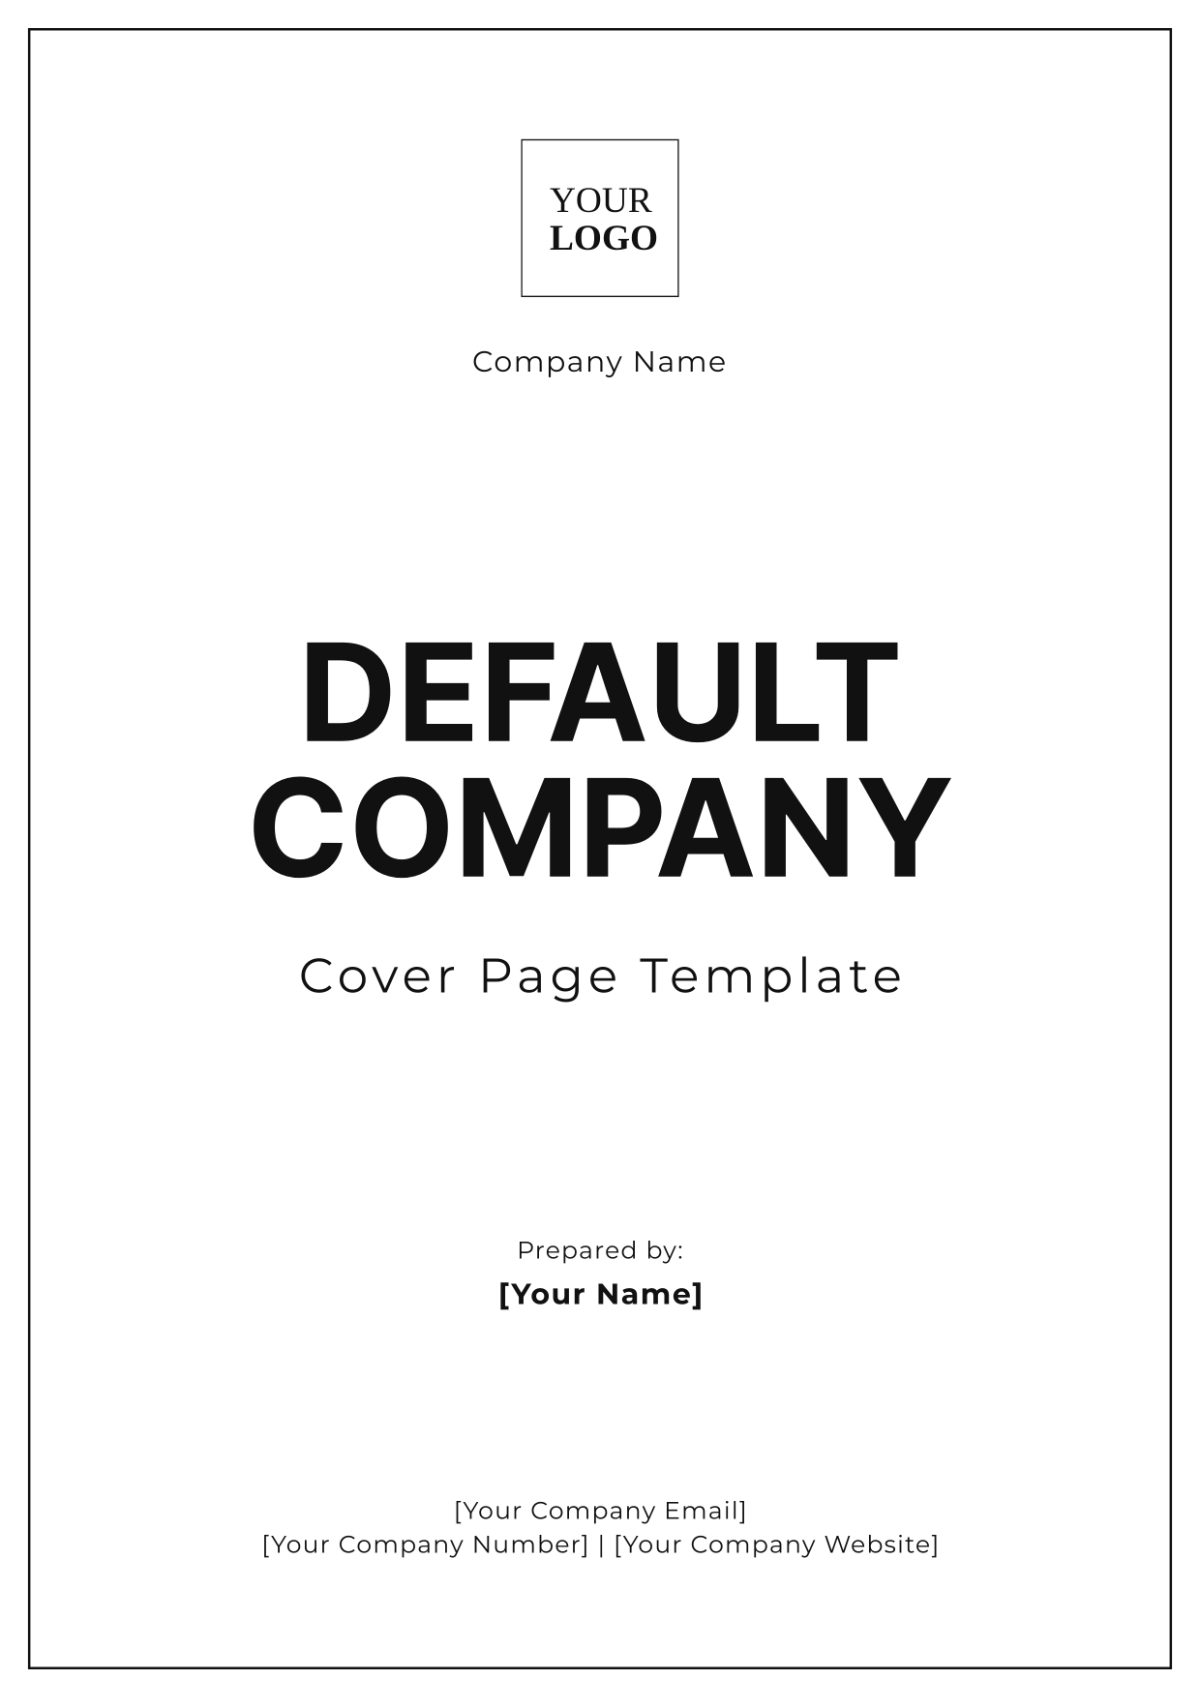 Default Company Cover Page